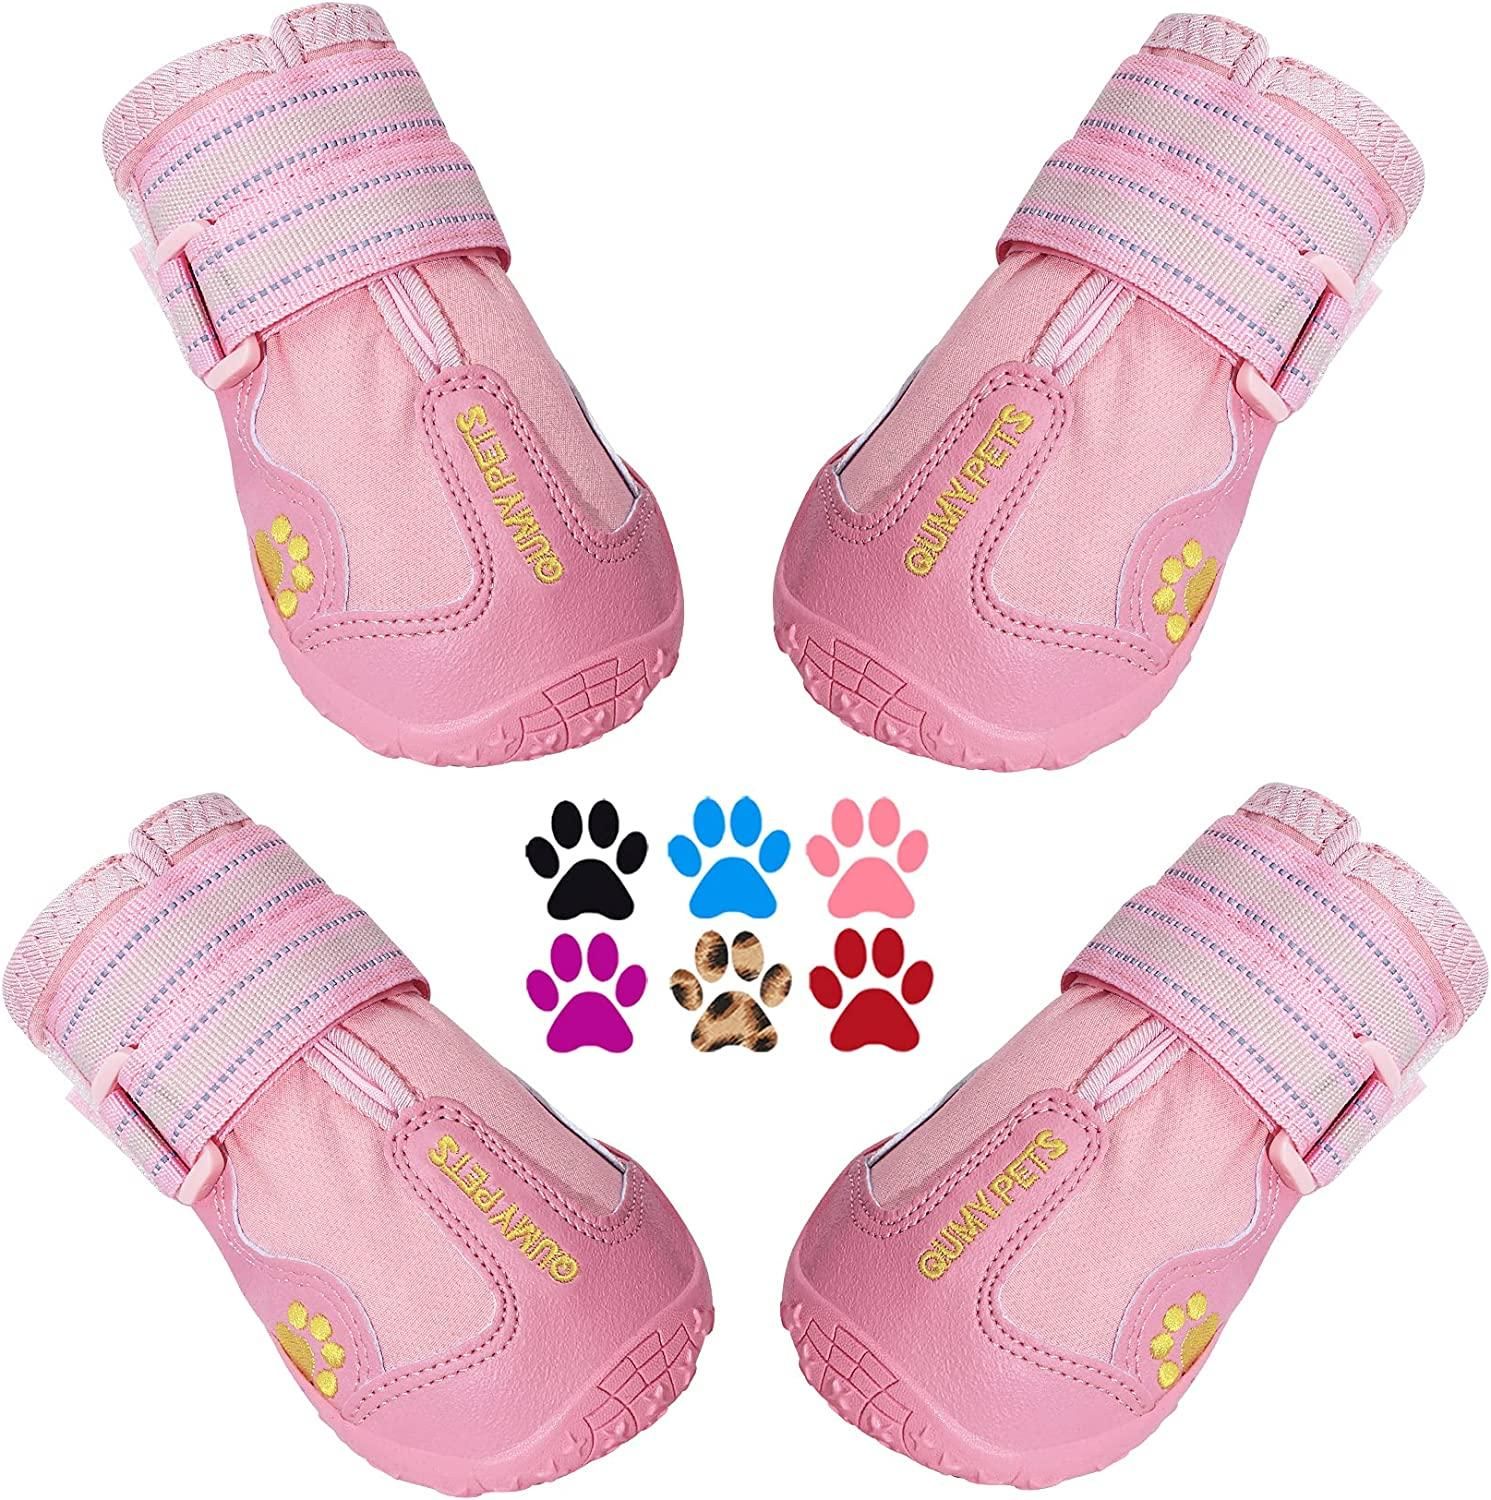 Cute And Colorful Dog Winter Clothes - Brit + Co